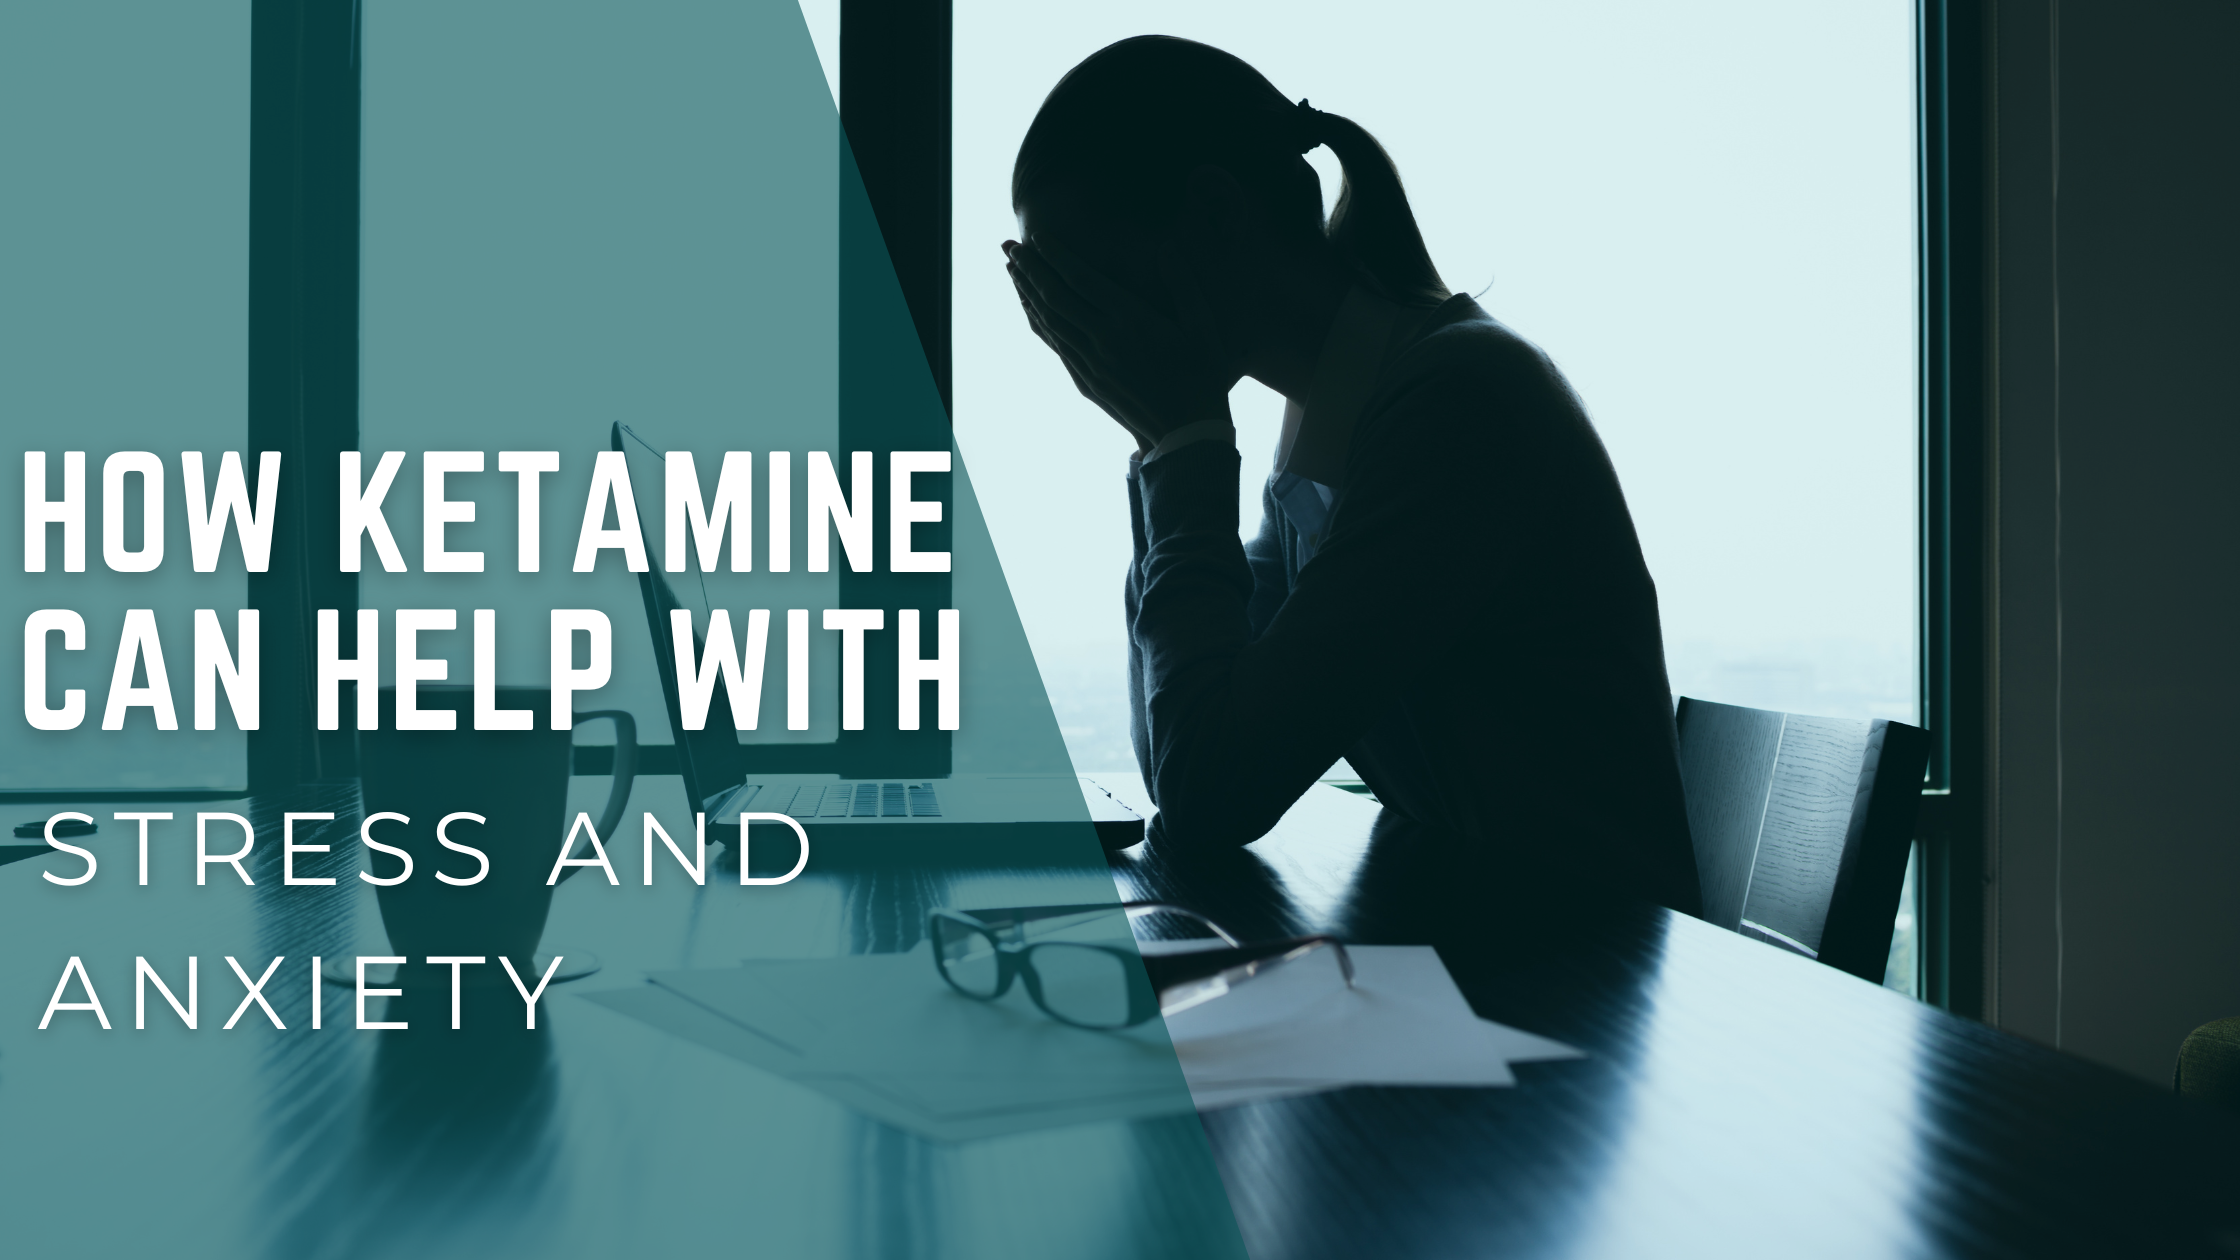 Image with blog title for MindBodyComplete post How Ketamine Can Help with Stress and Anxiety